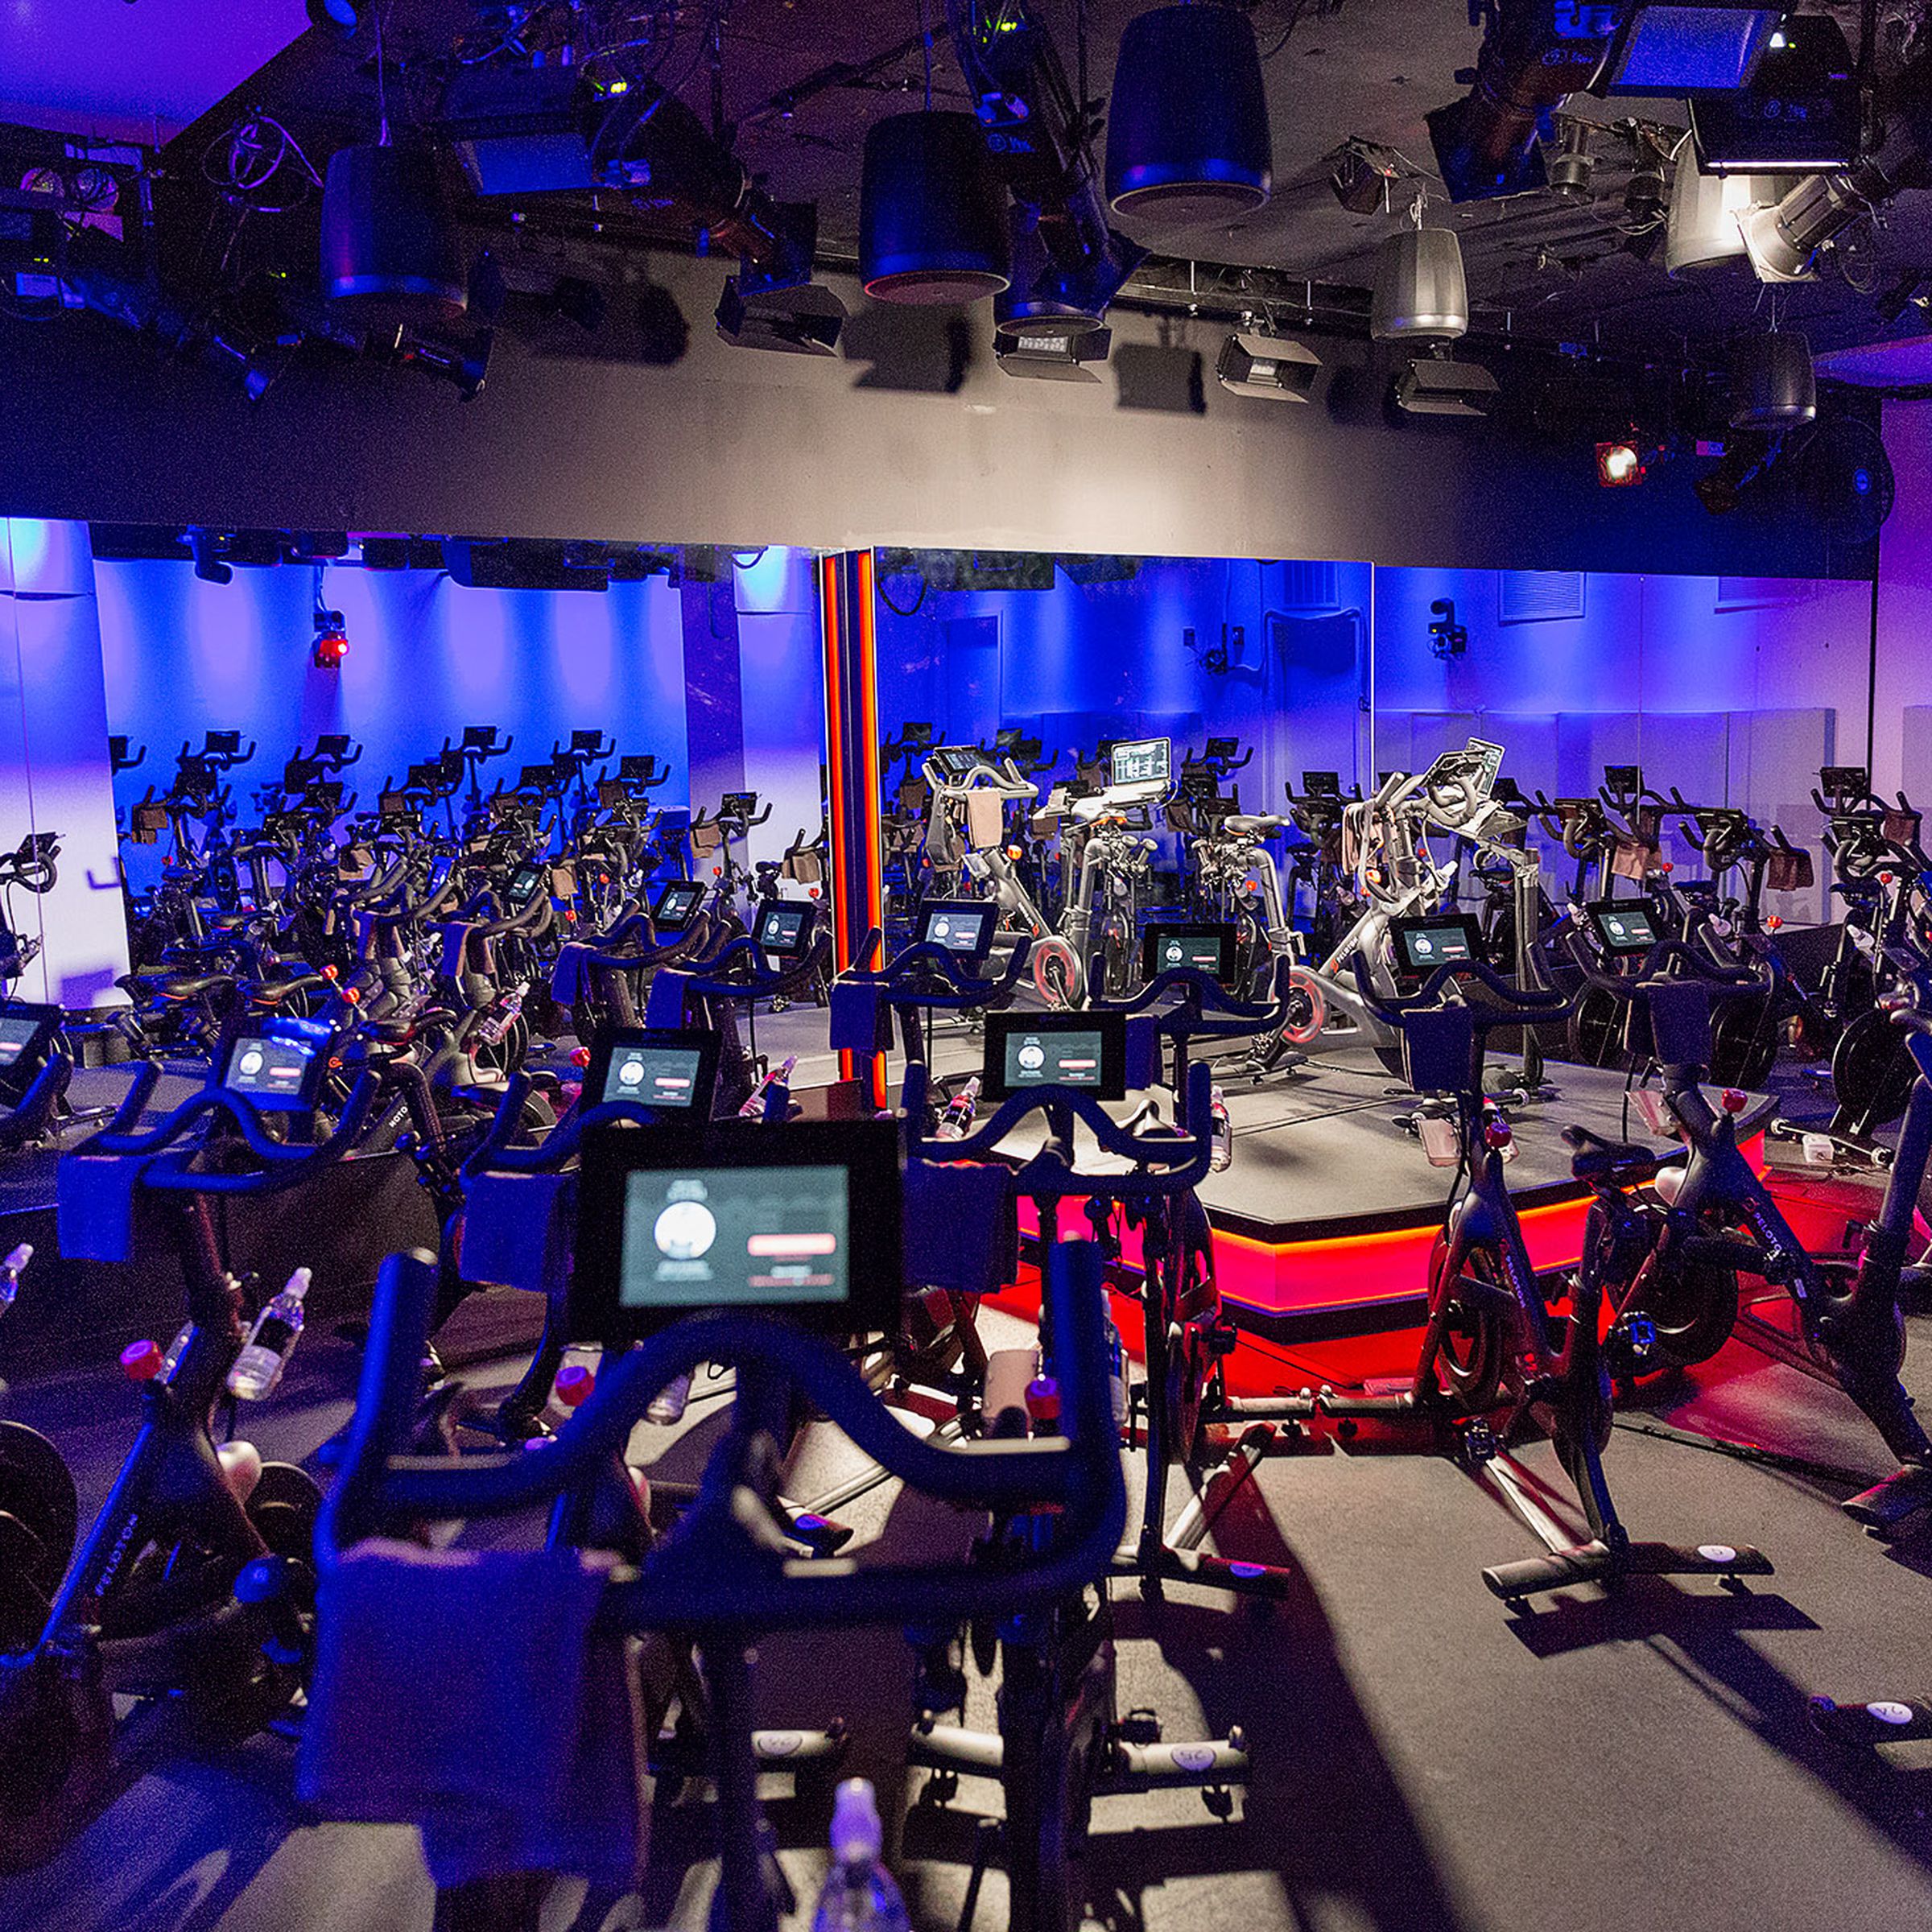 An empty Peloton studio with several of its bikes